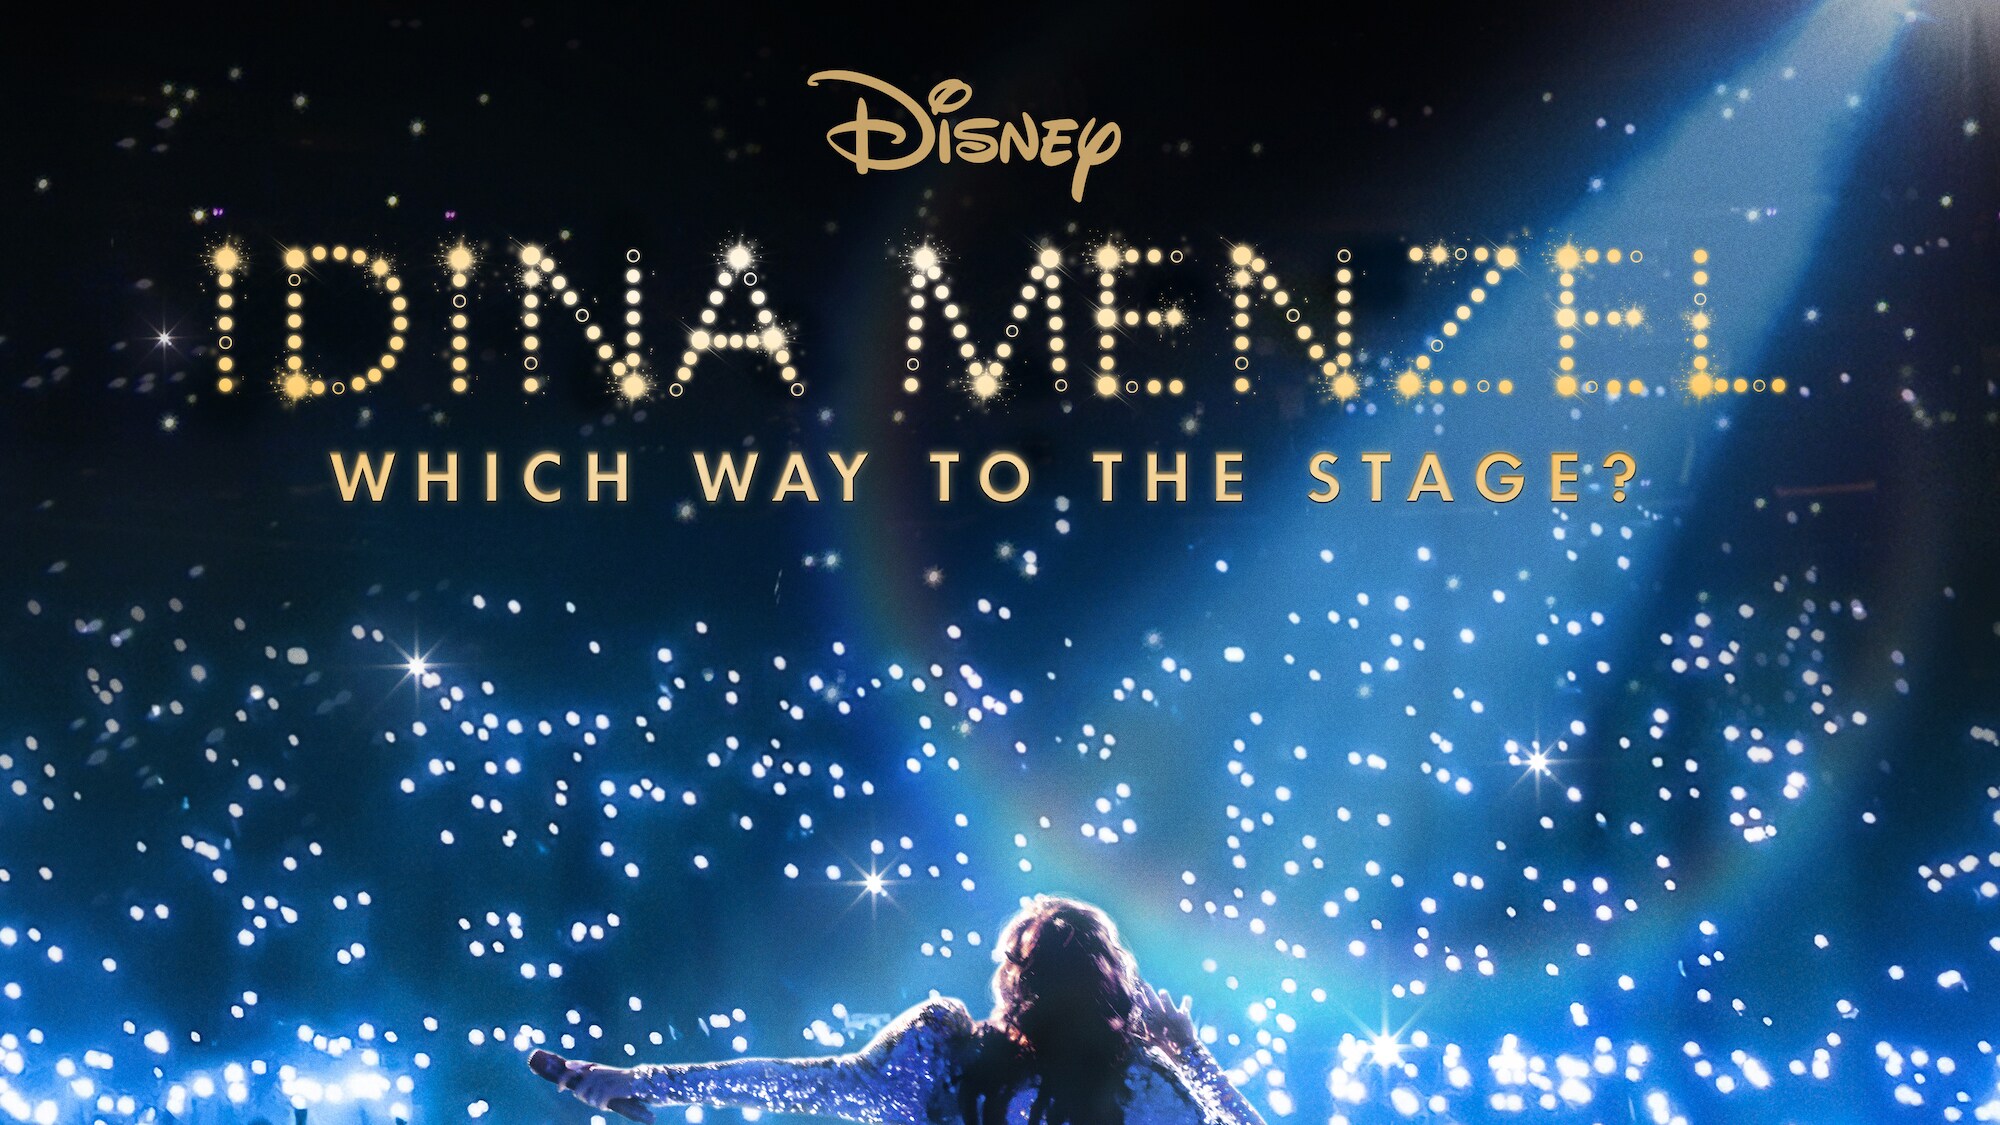 Idina Menzel: Which Way to the Stage? Key Art